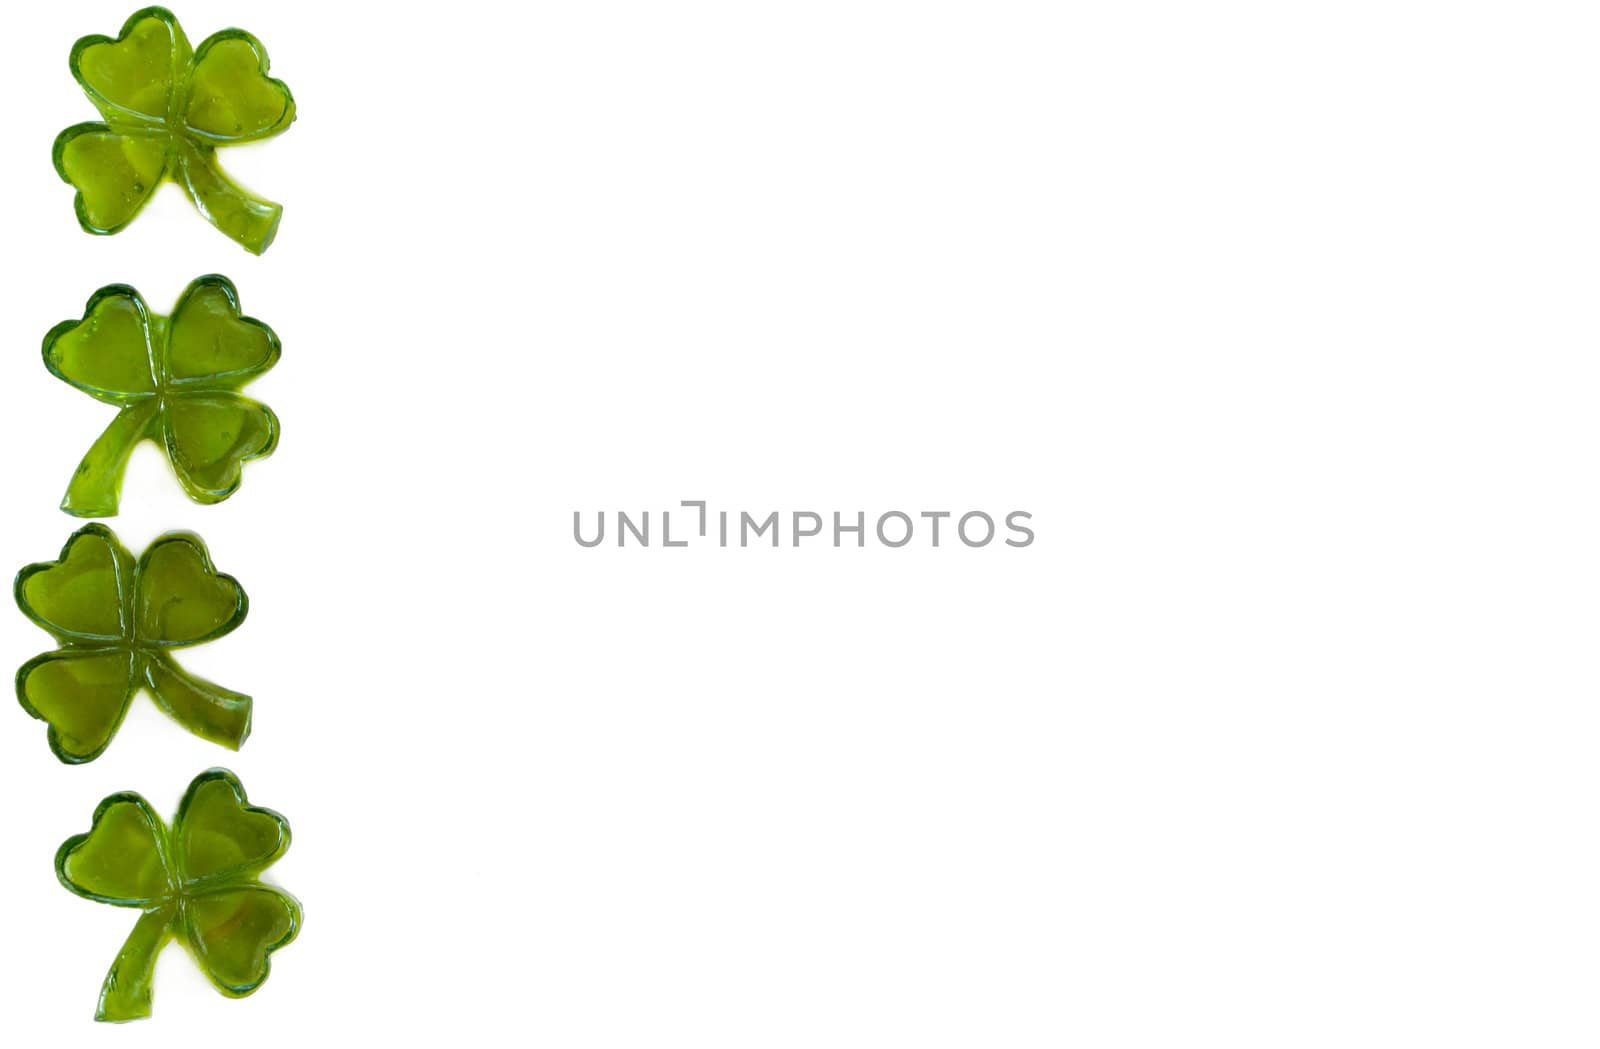 Four leaf clovers making a boarder on a white background.